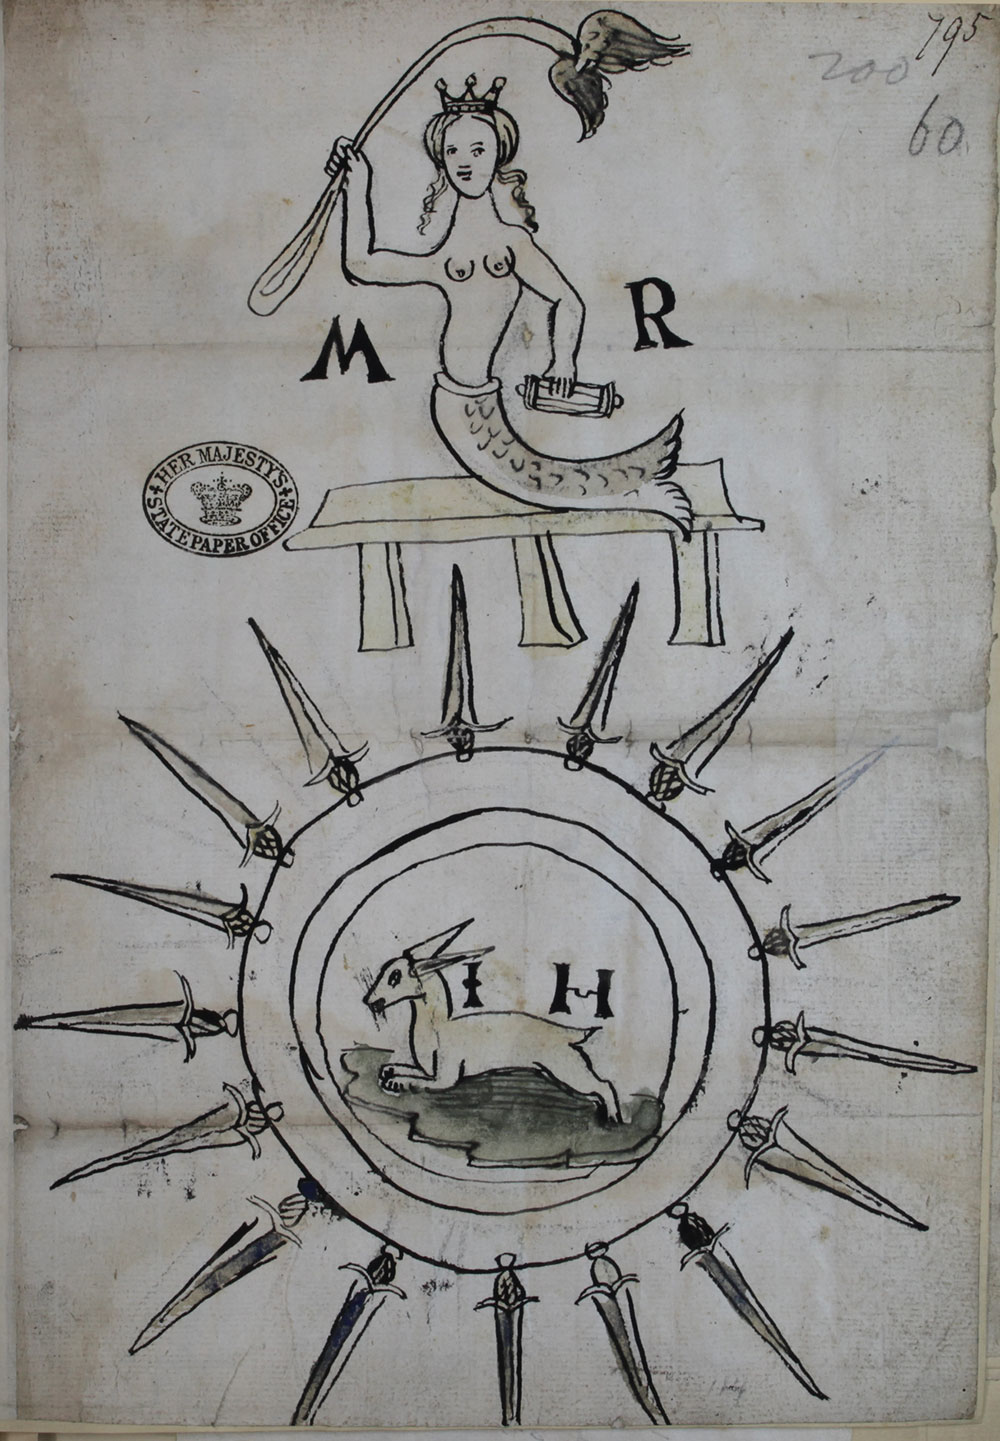 A mermaid with a crown sits on a bench above a hare in a circle surrounded by swords. The letters M and R are next to the mermaid.